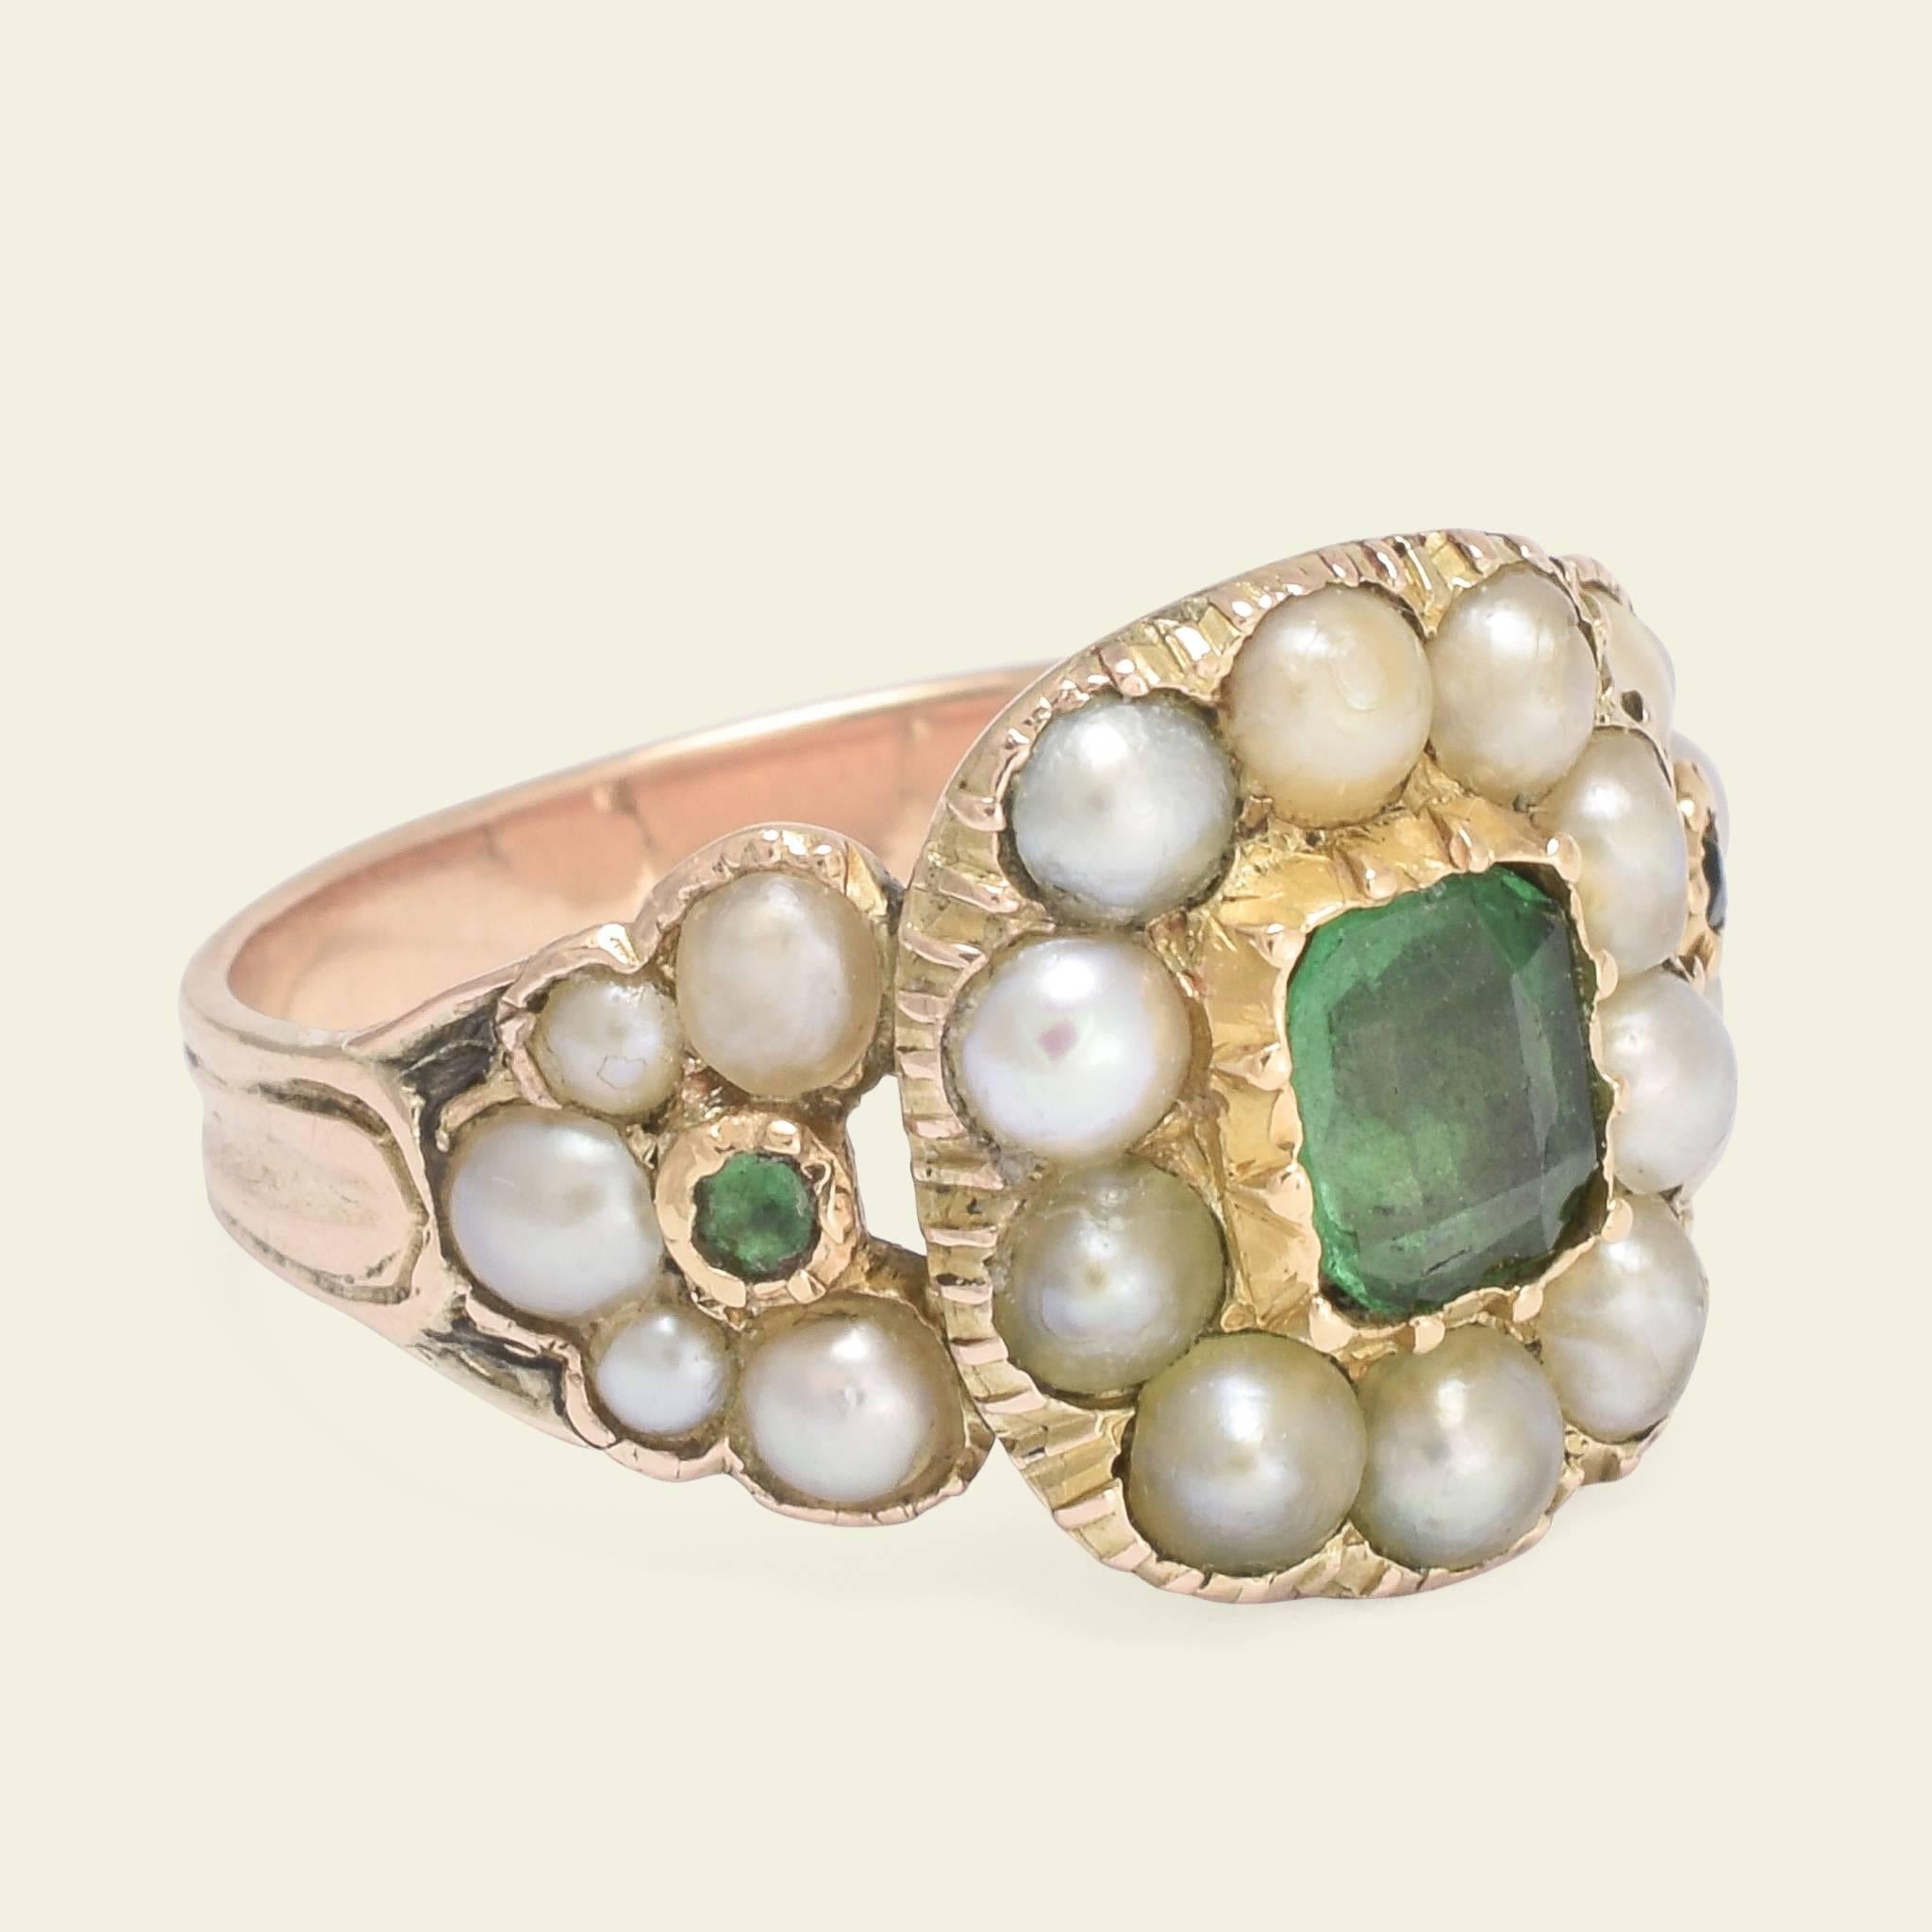 This luscious Georgian emerald and pearl ring is fashioned in 10k gold. The cluster of the head is formed by a verdant 5.1 x 5.6mm emerald haloed with pearls of subtly different hues. The demi-cluster shoulders each feature an arc of pearls